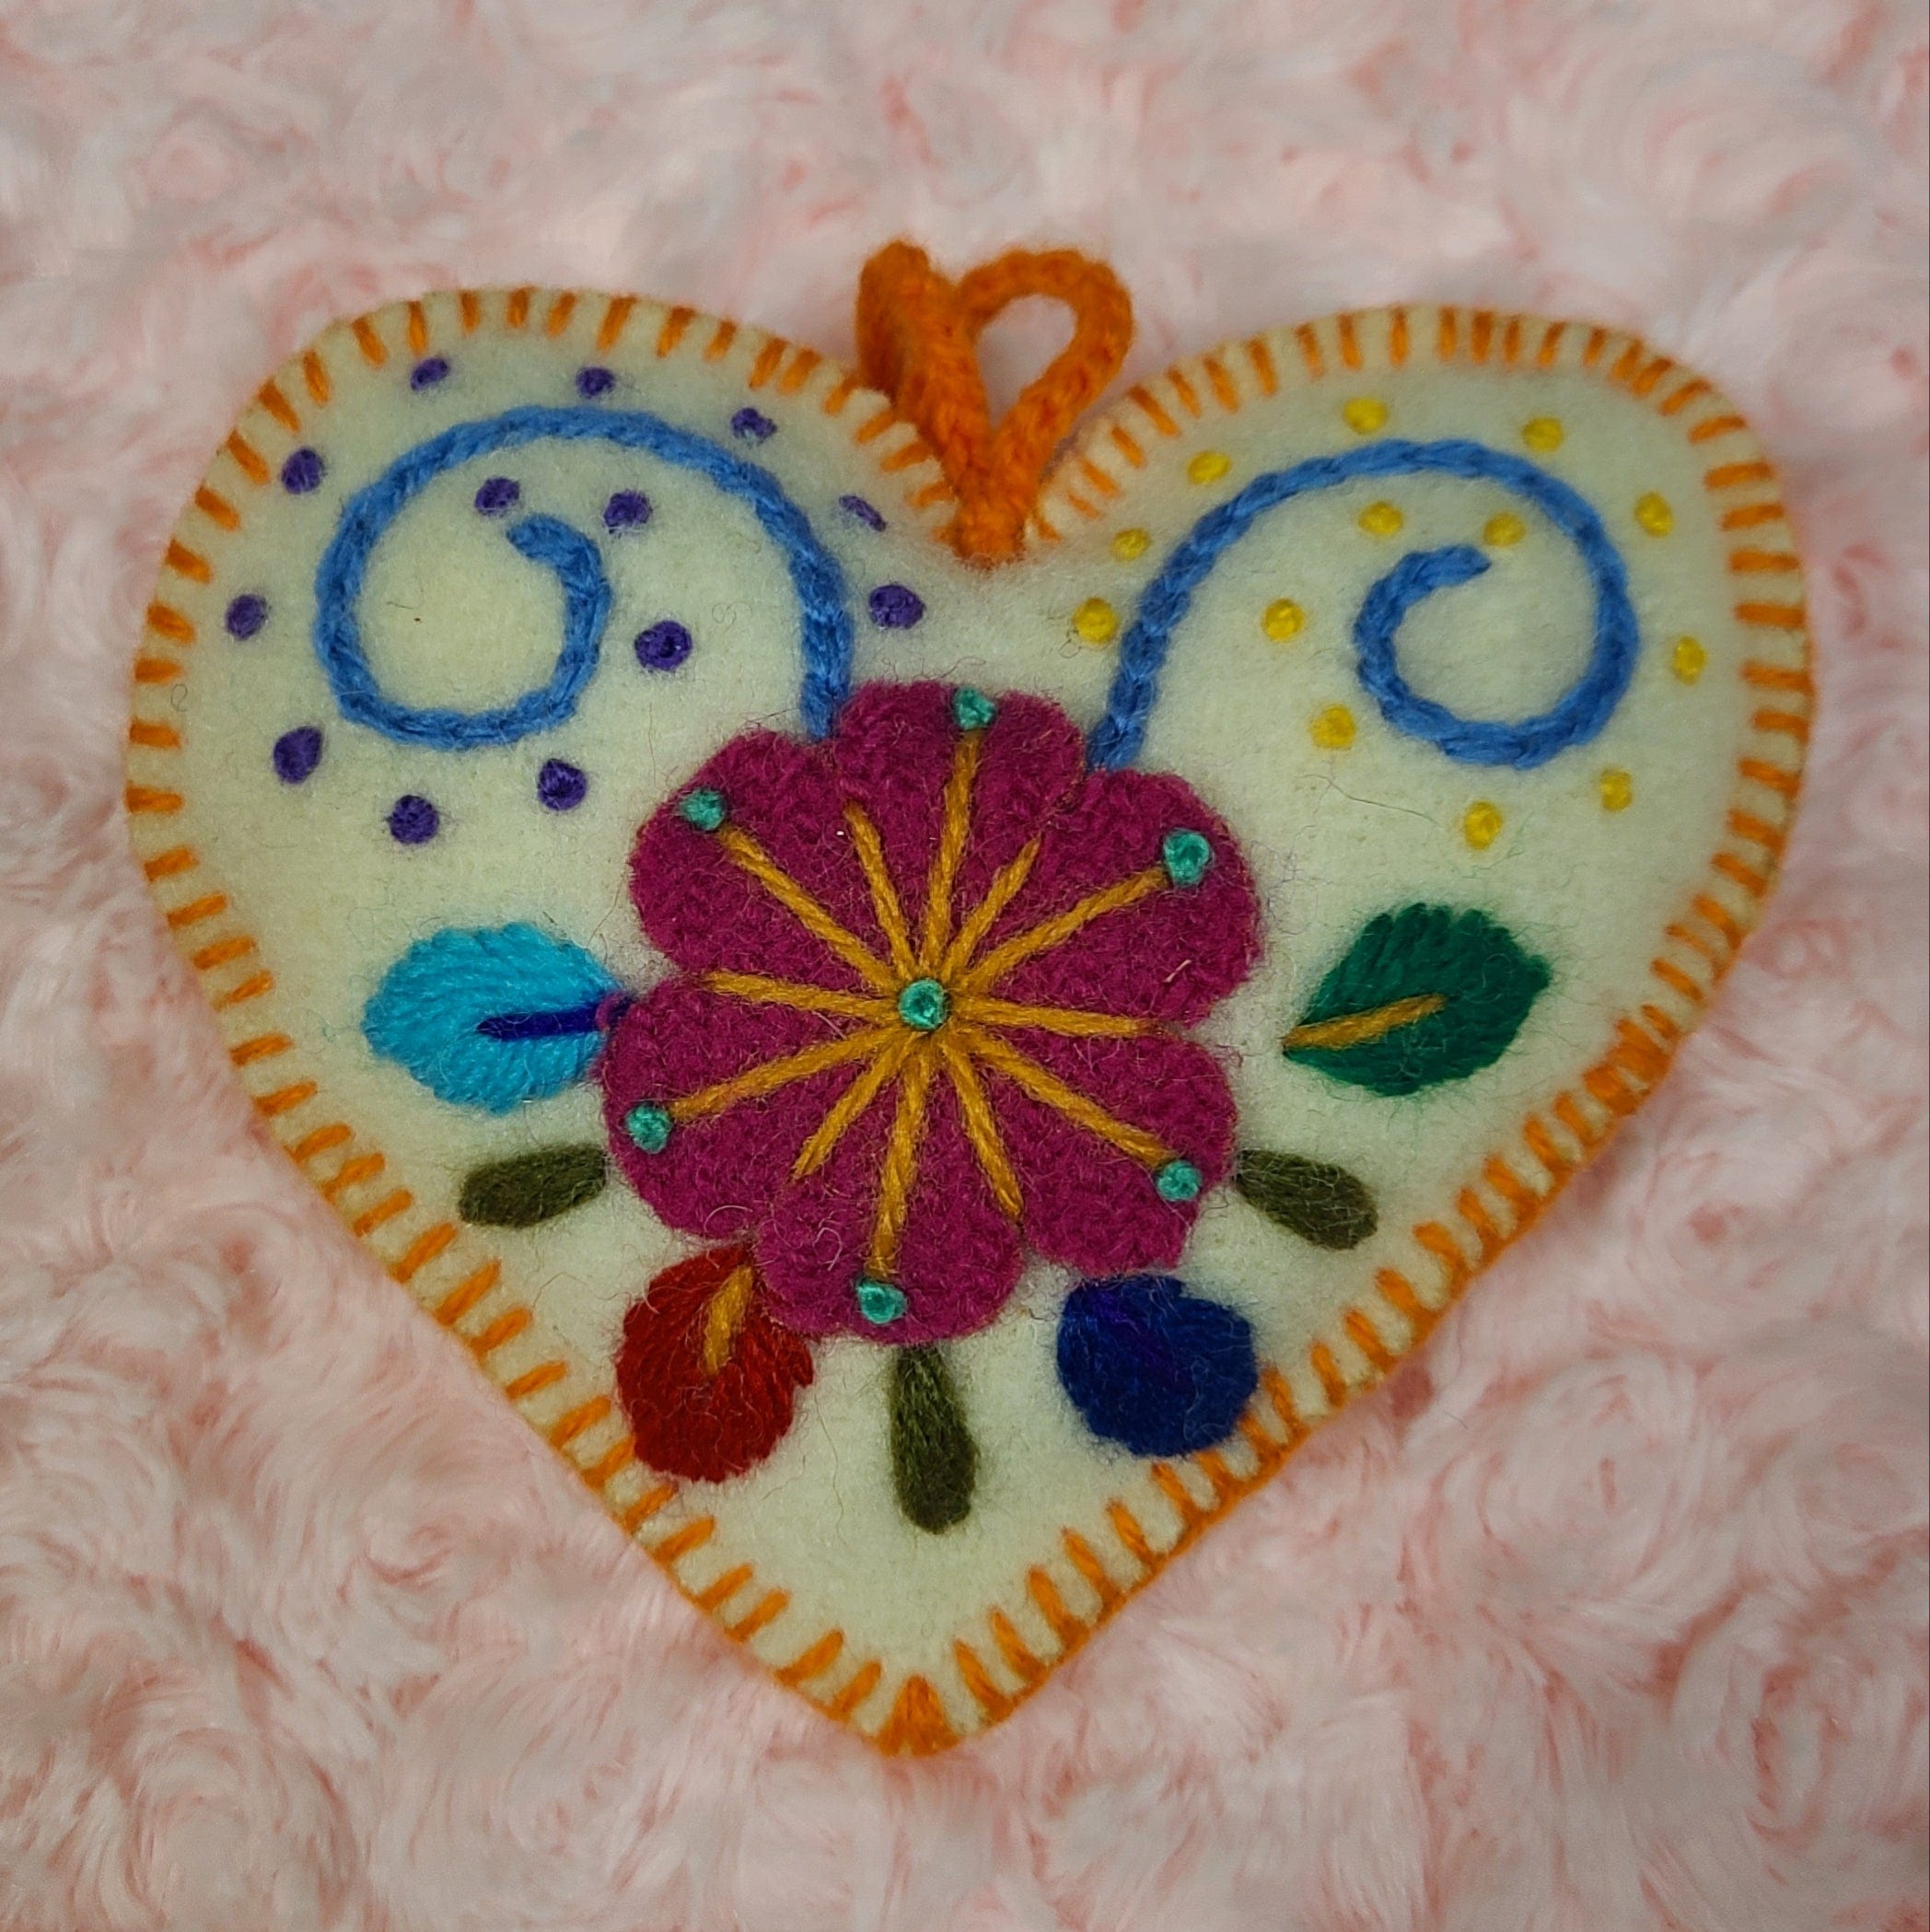 Ornaments 4 Orphans Ornaments 4 Orphans Embroidered Wool Heart Ornaments - Little Miss Muffin Children & Home